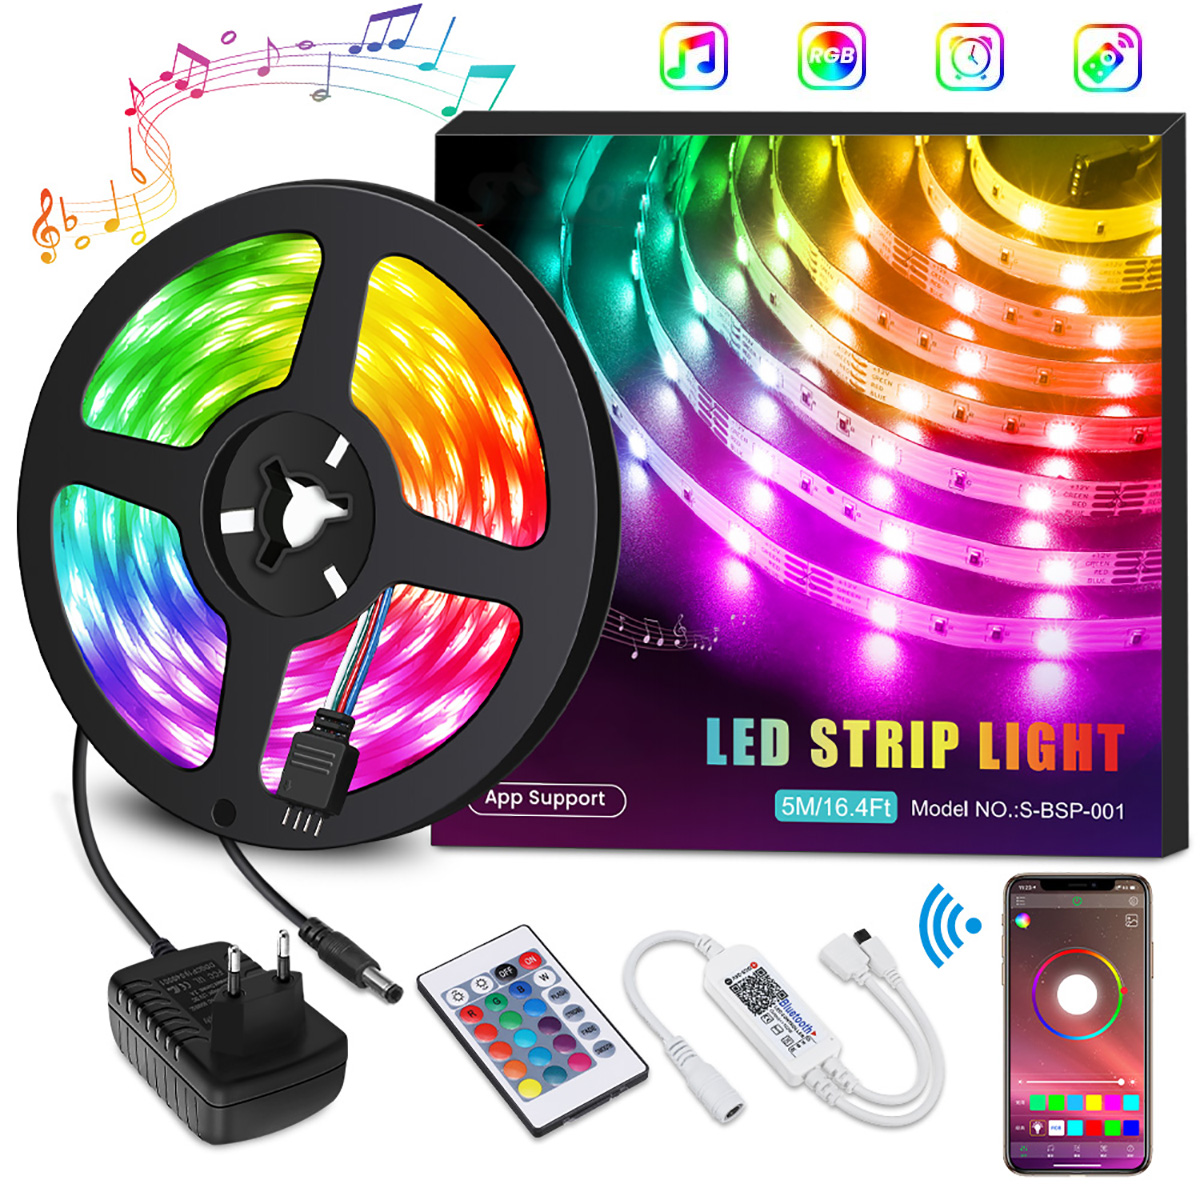 SOLMORE-Light-Strips-Music-RGB-light-strips-Smart-Phone-App-Controlled-Ehome-Light-with-Overcurrent--1684354-1